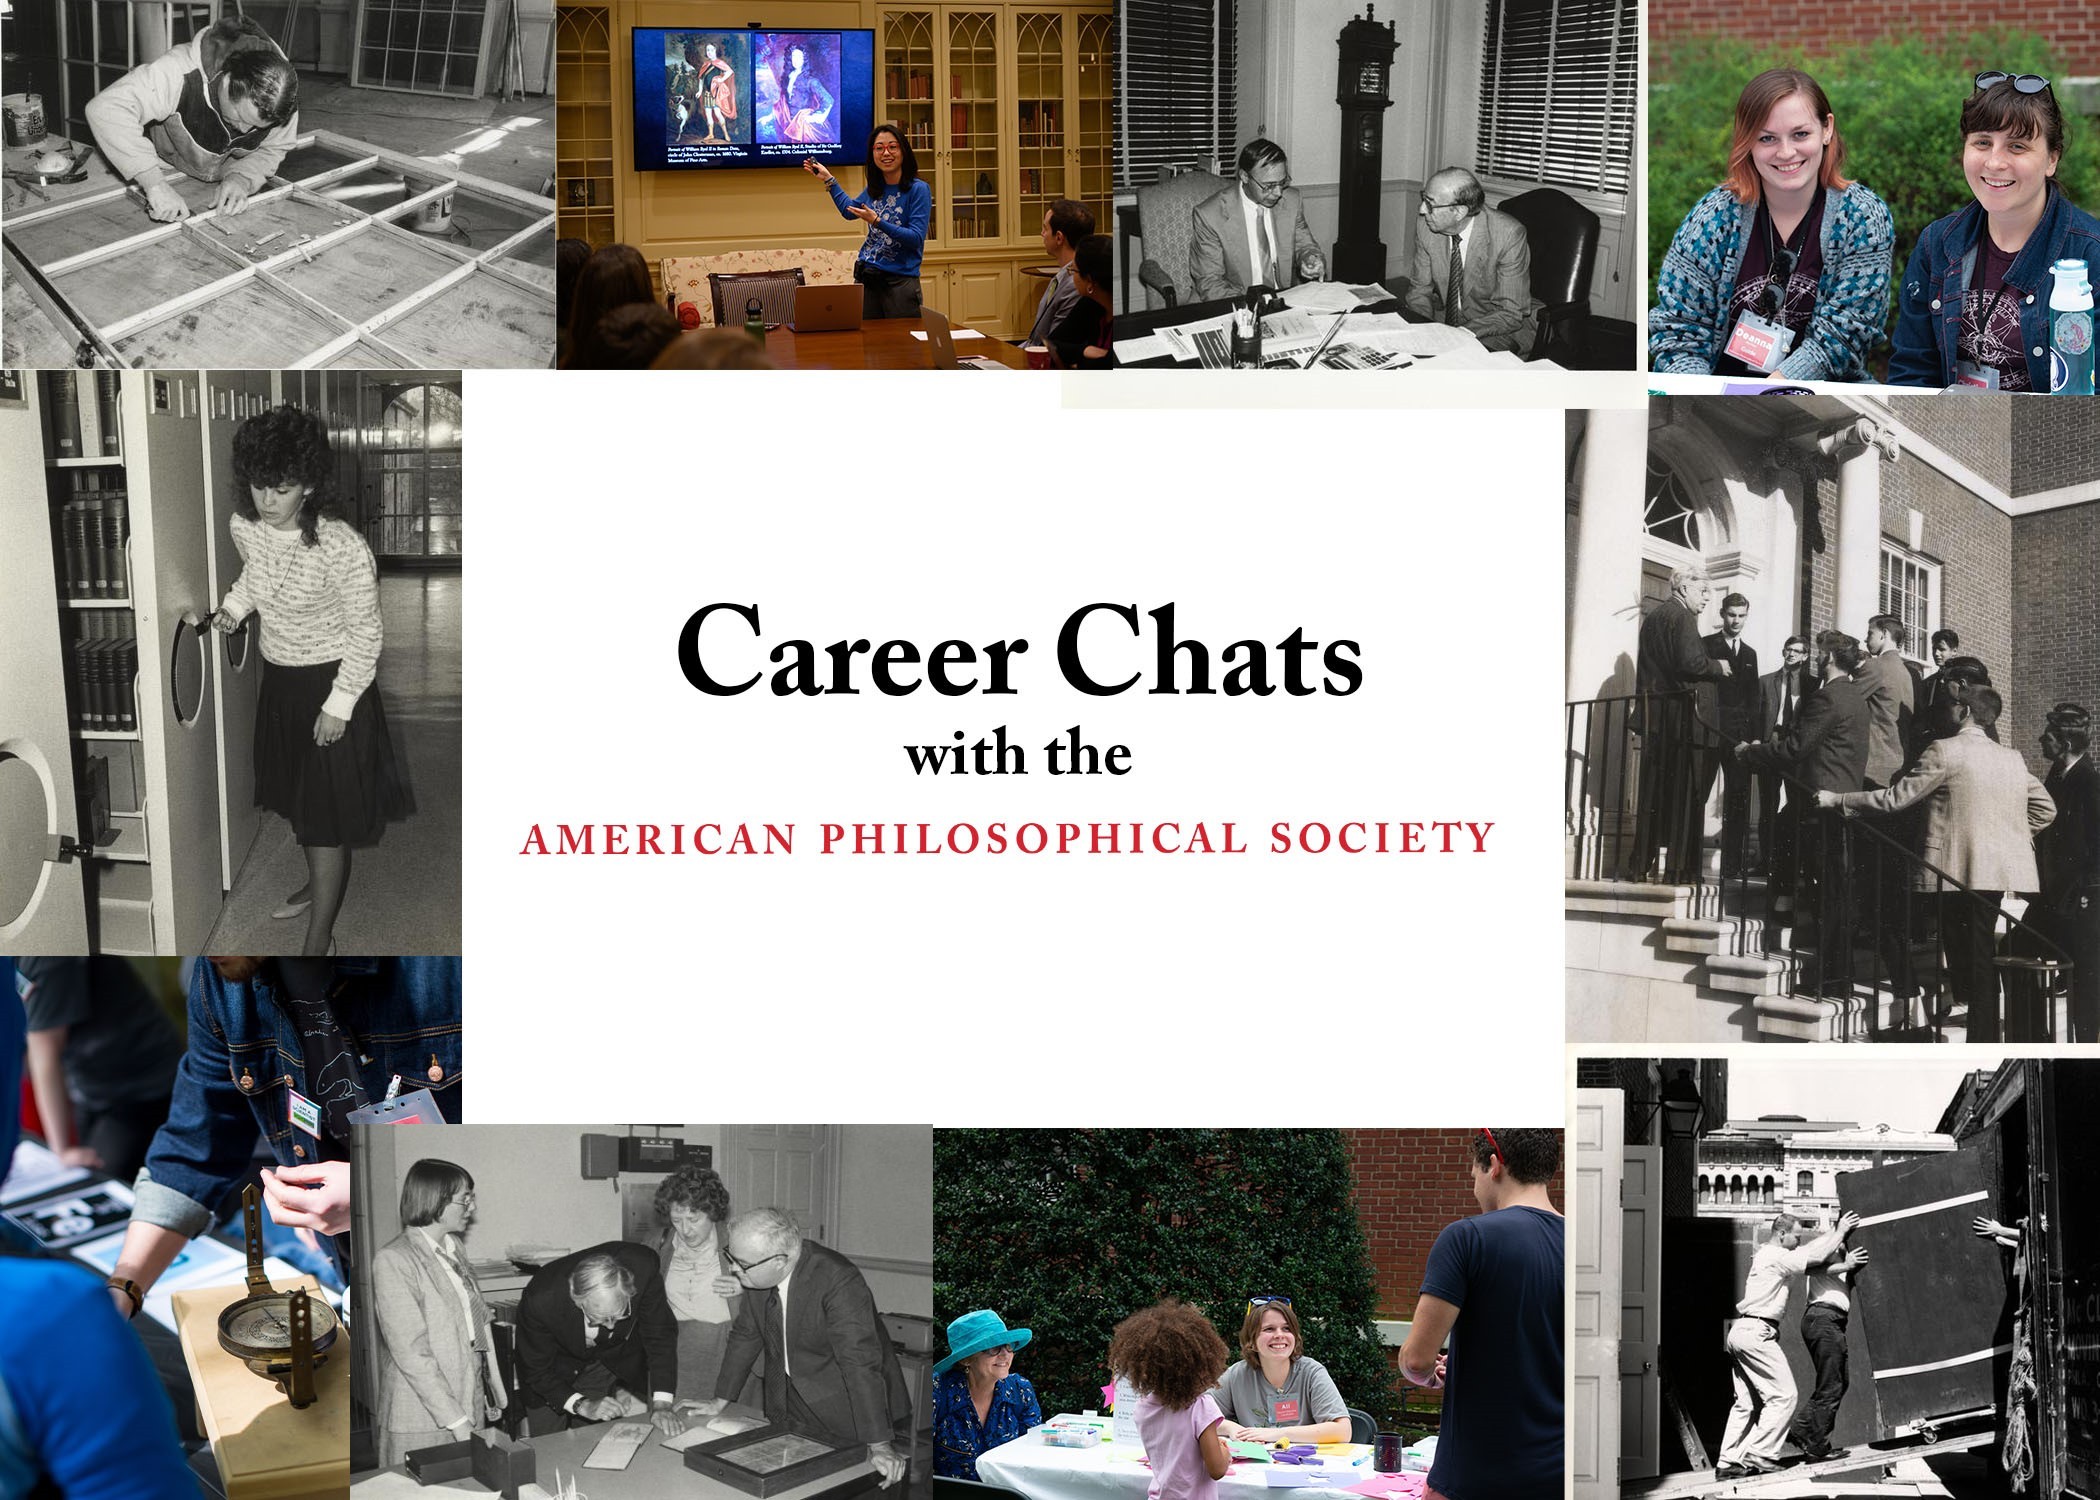 "Career Chats with the American Philosophical Society" surrounded by old and current photos of staff